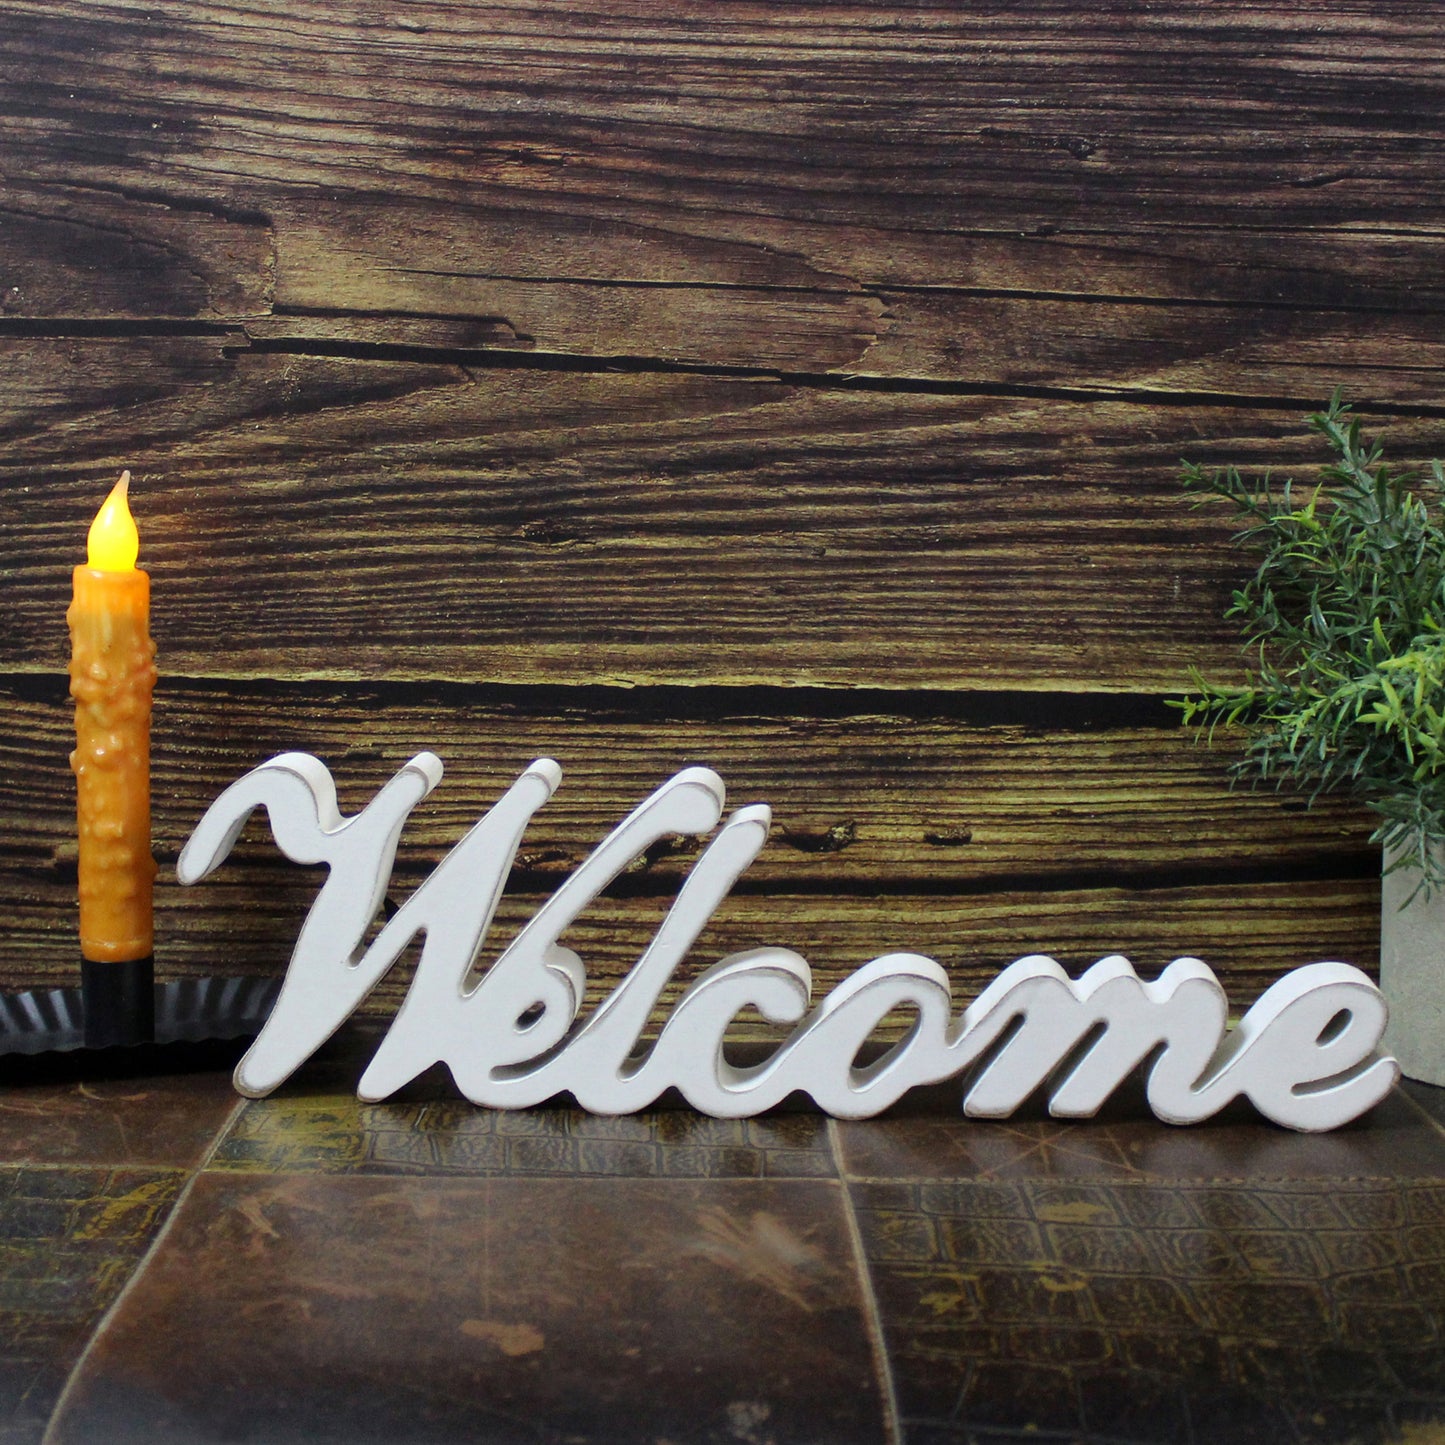 CVHOMEDECO. Rustic Vintage Distressed White Wooden Words Sign Free Standing "Welcome" Tabletop/Shelf/Home Wall/Office Decoration Art, 14.5 x 4.25 x 1 Inch